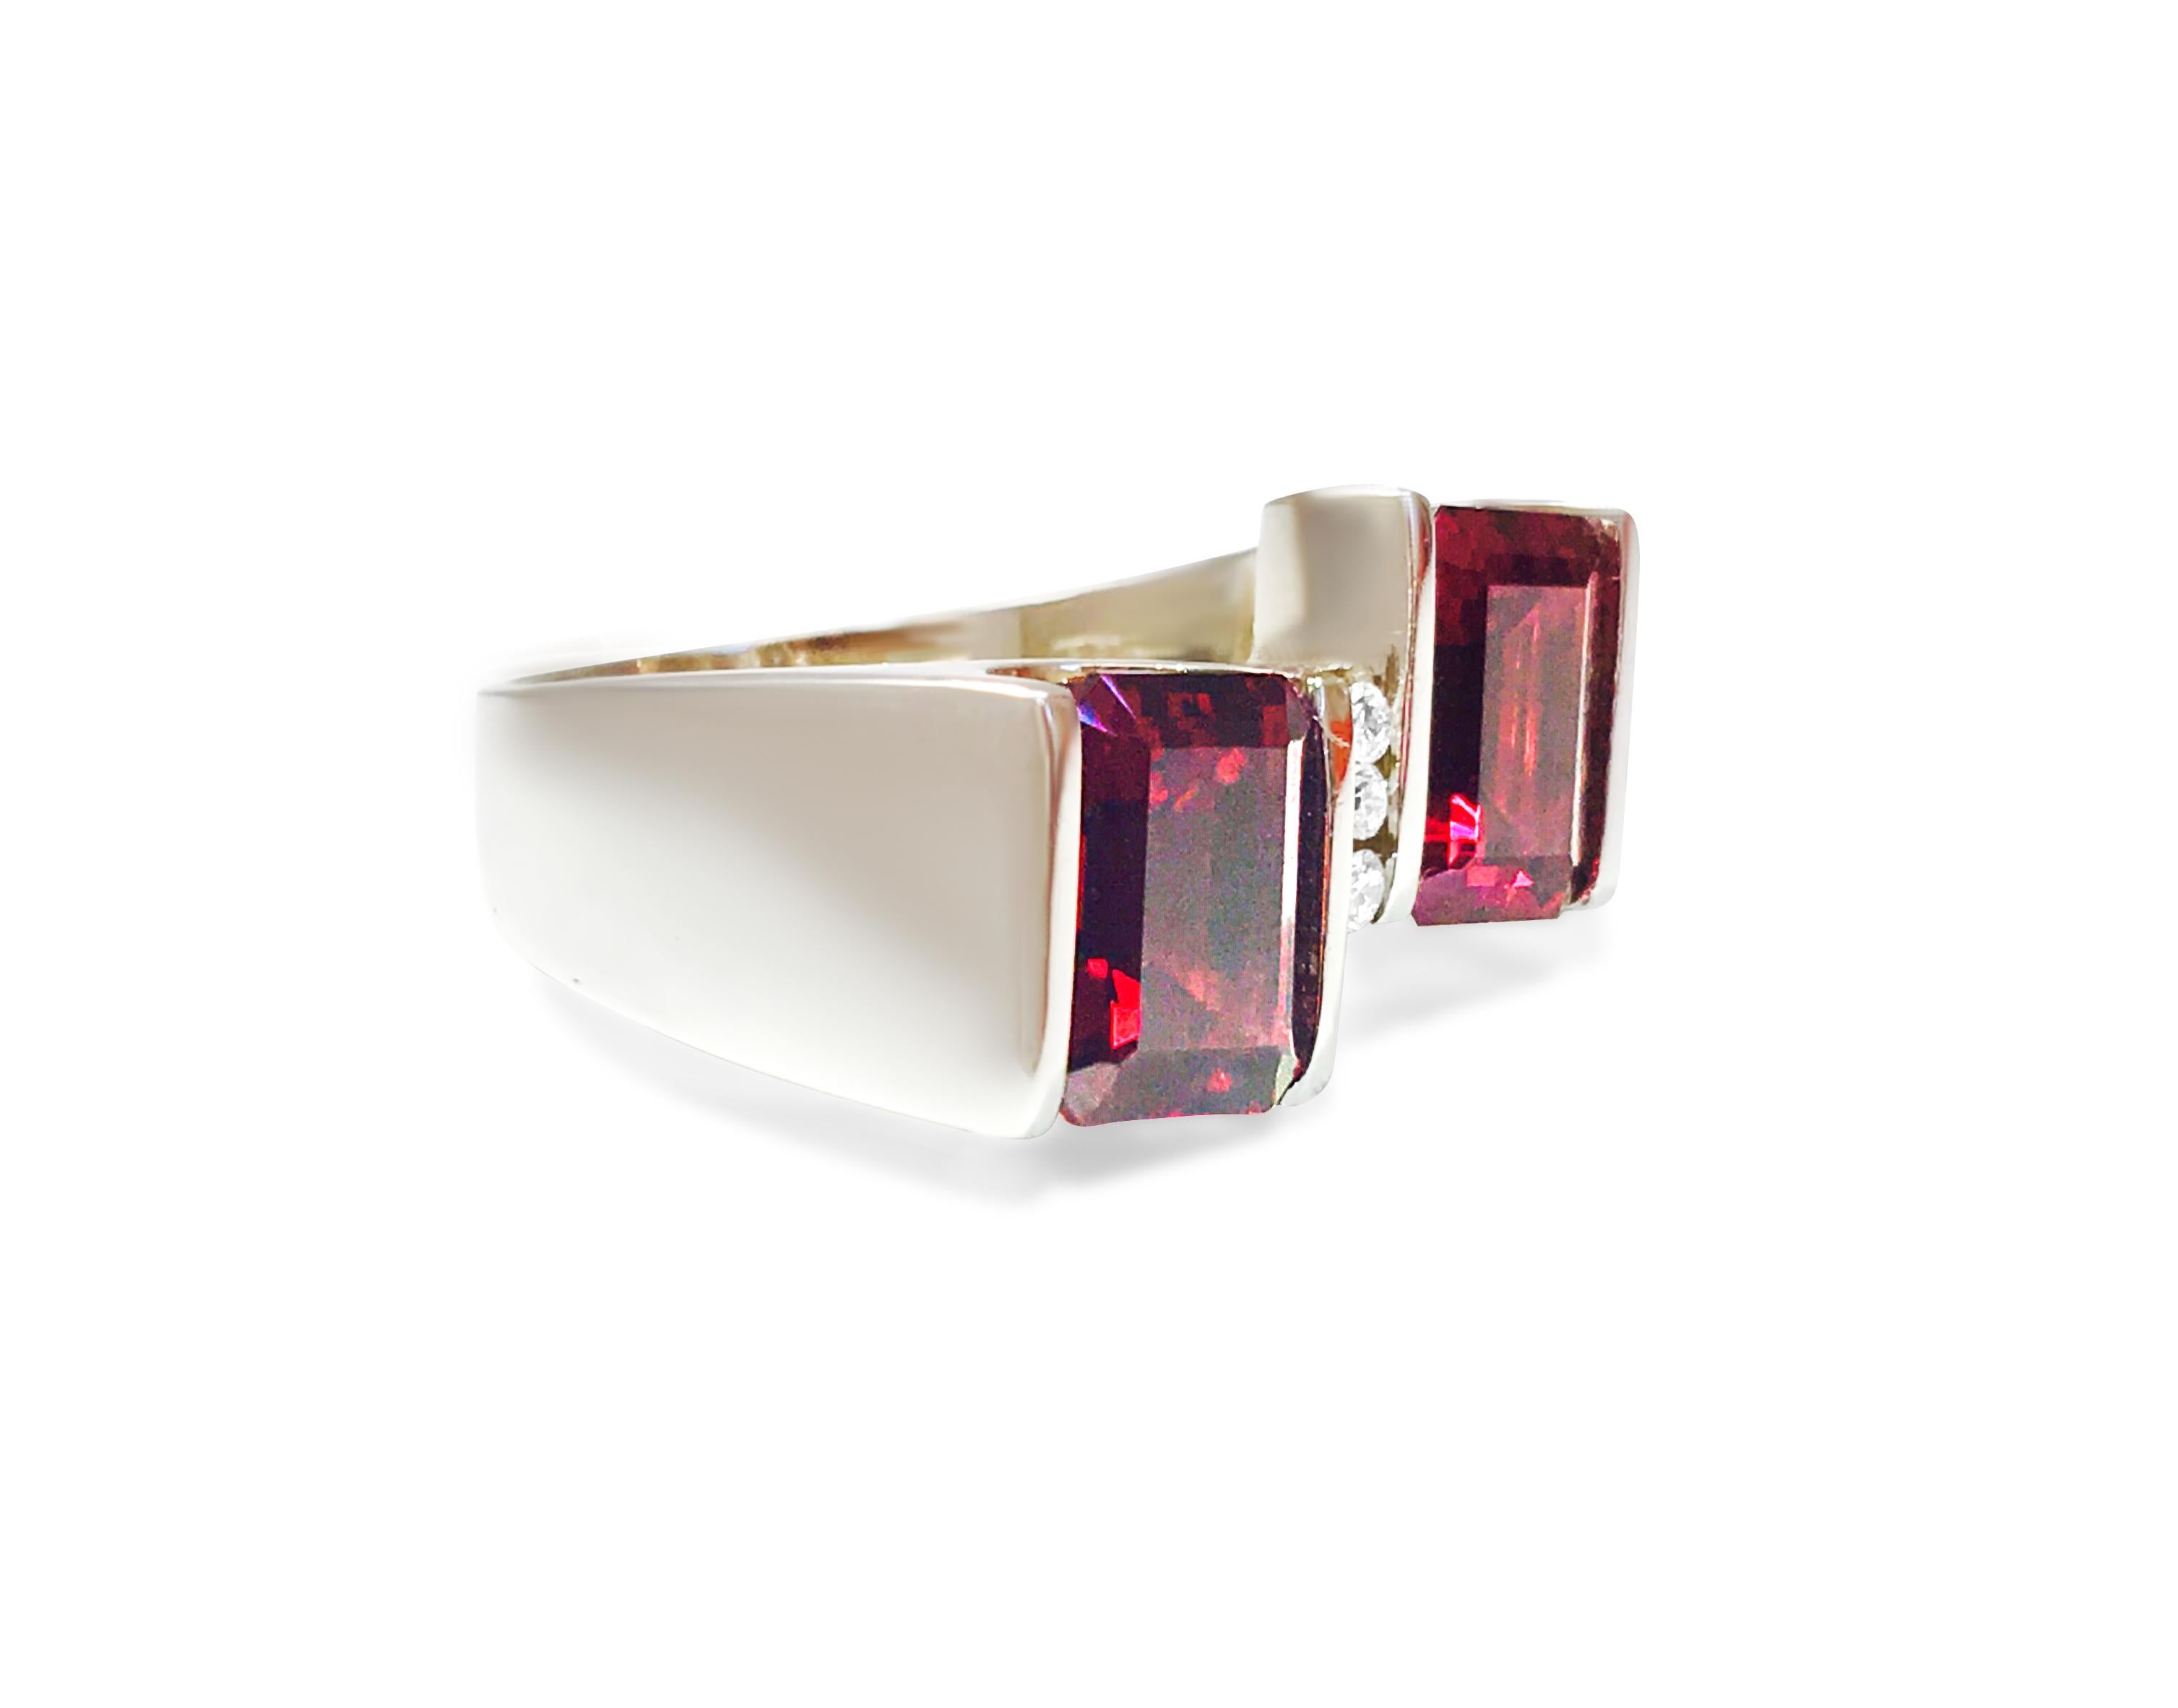 Retro 14K Gold 7 Carat Natural Garnet and Diamond Ring. For Sale